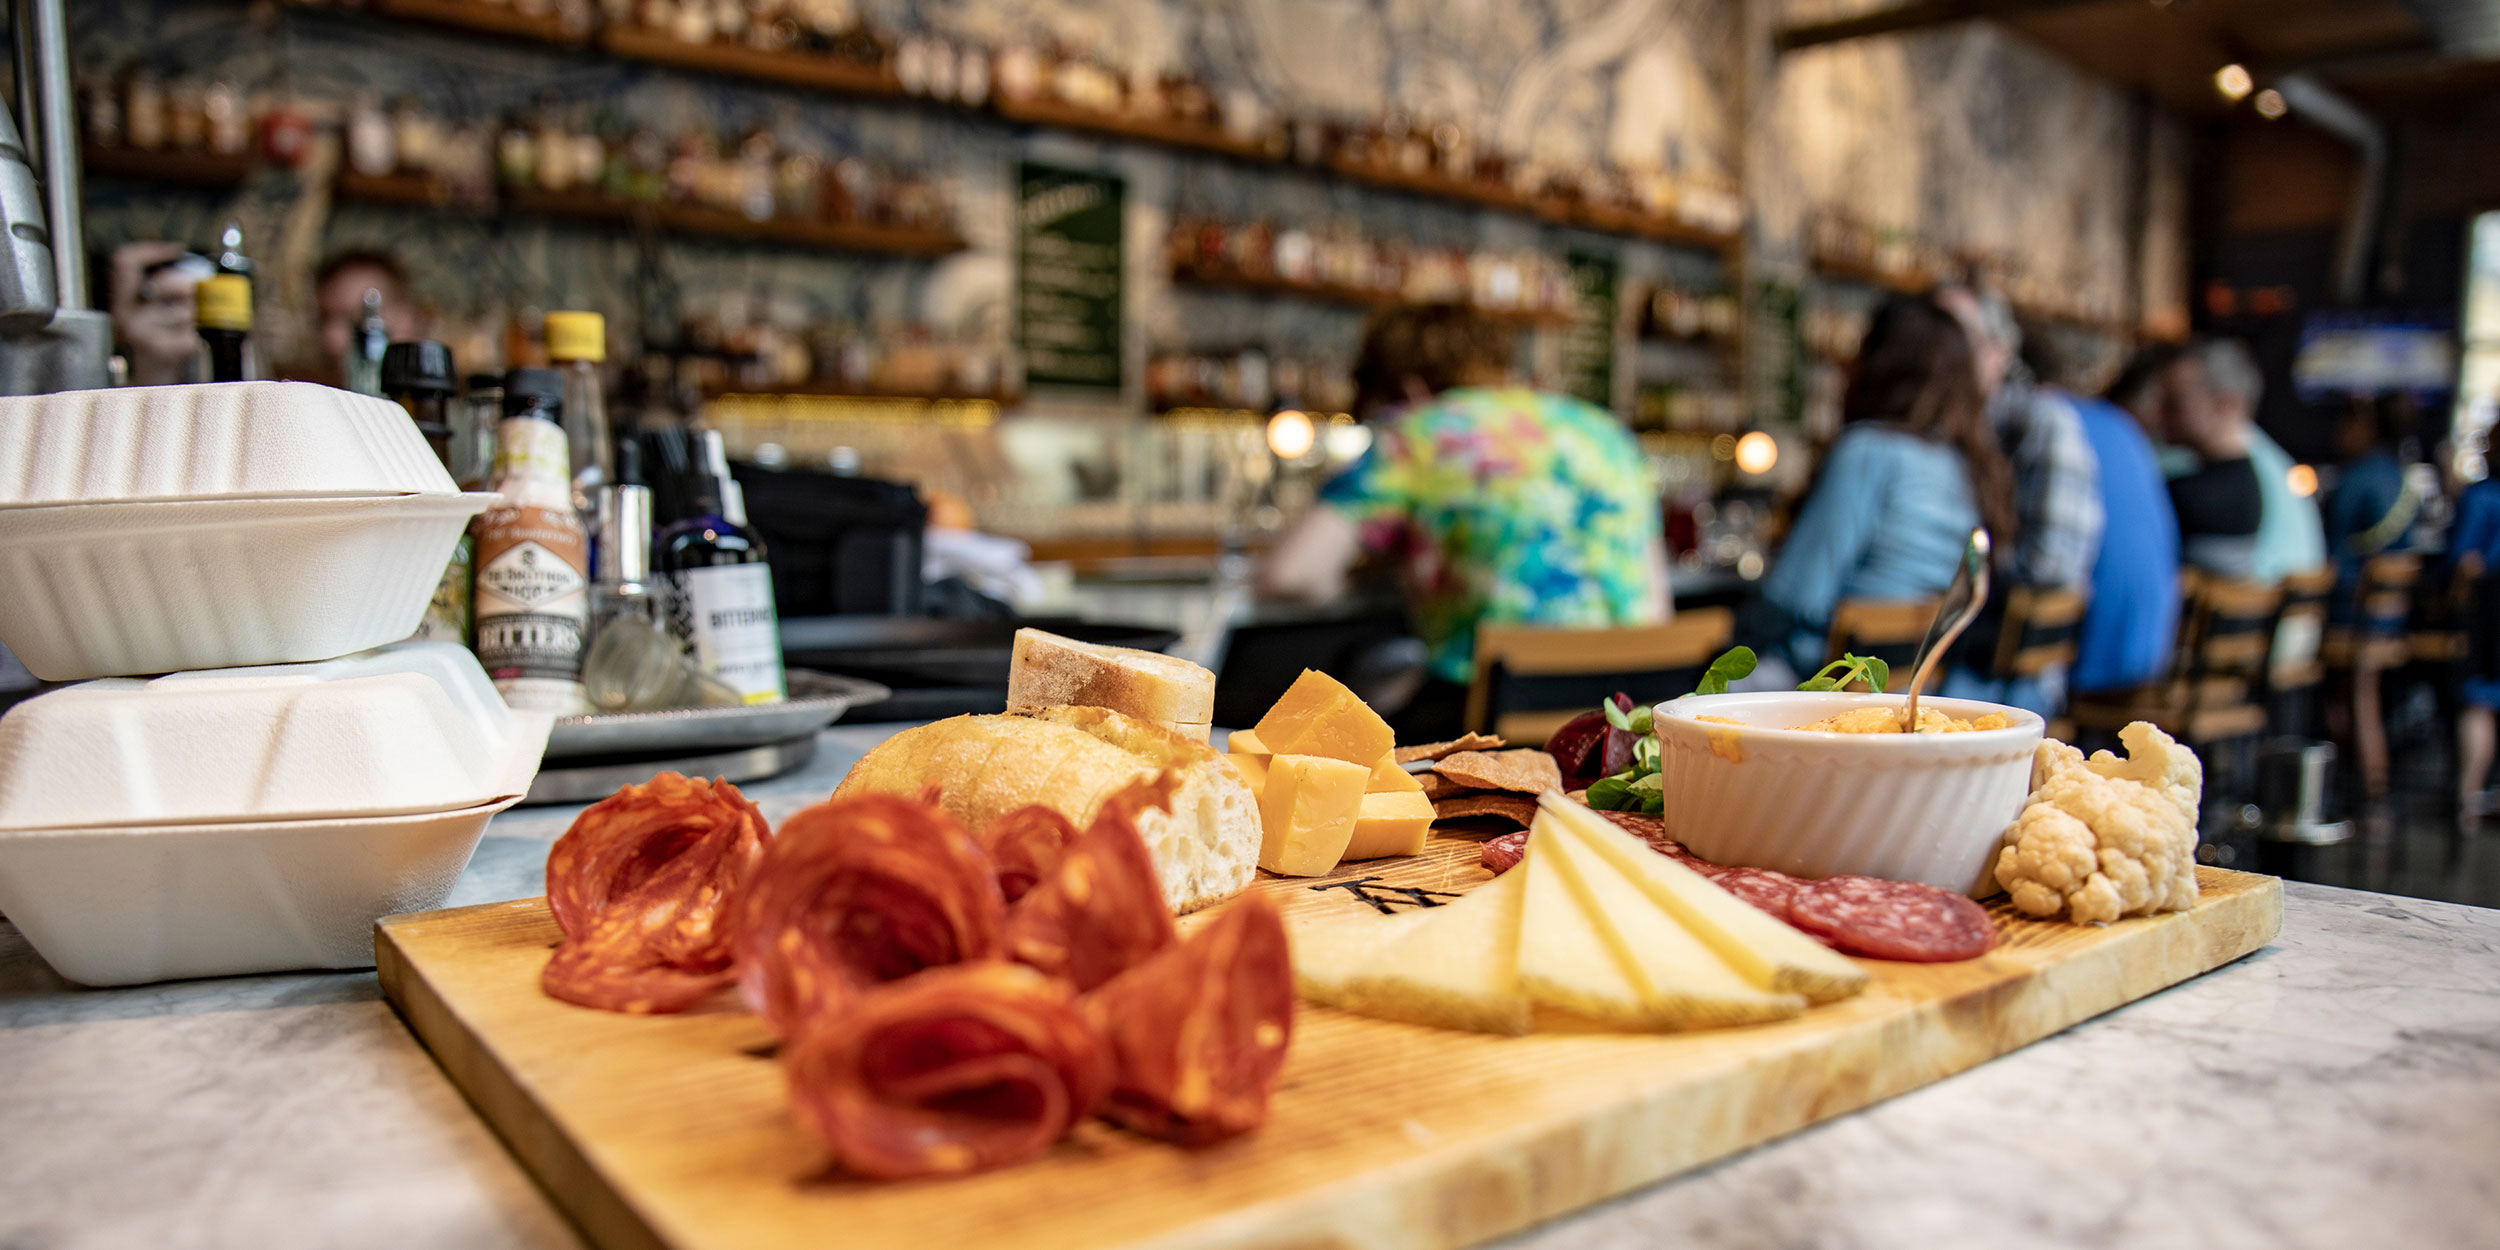 A charcuterie board filled with slices of various meats, cheeses, and fruits sits appetizingly in front of a blurred out bar in Wake County